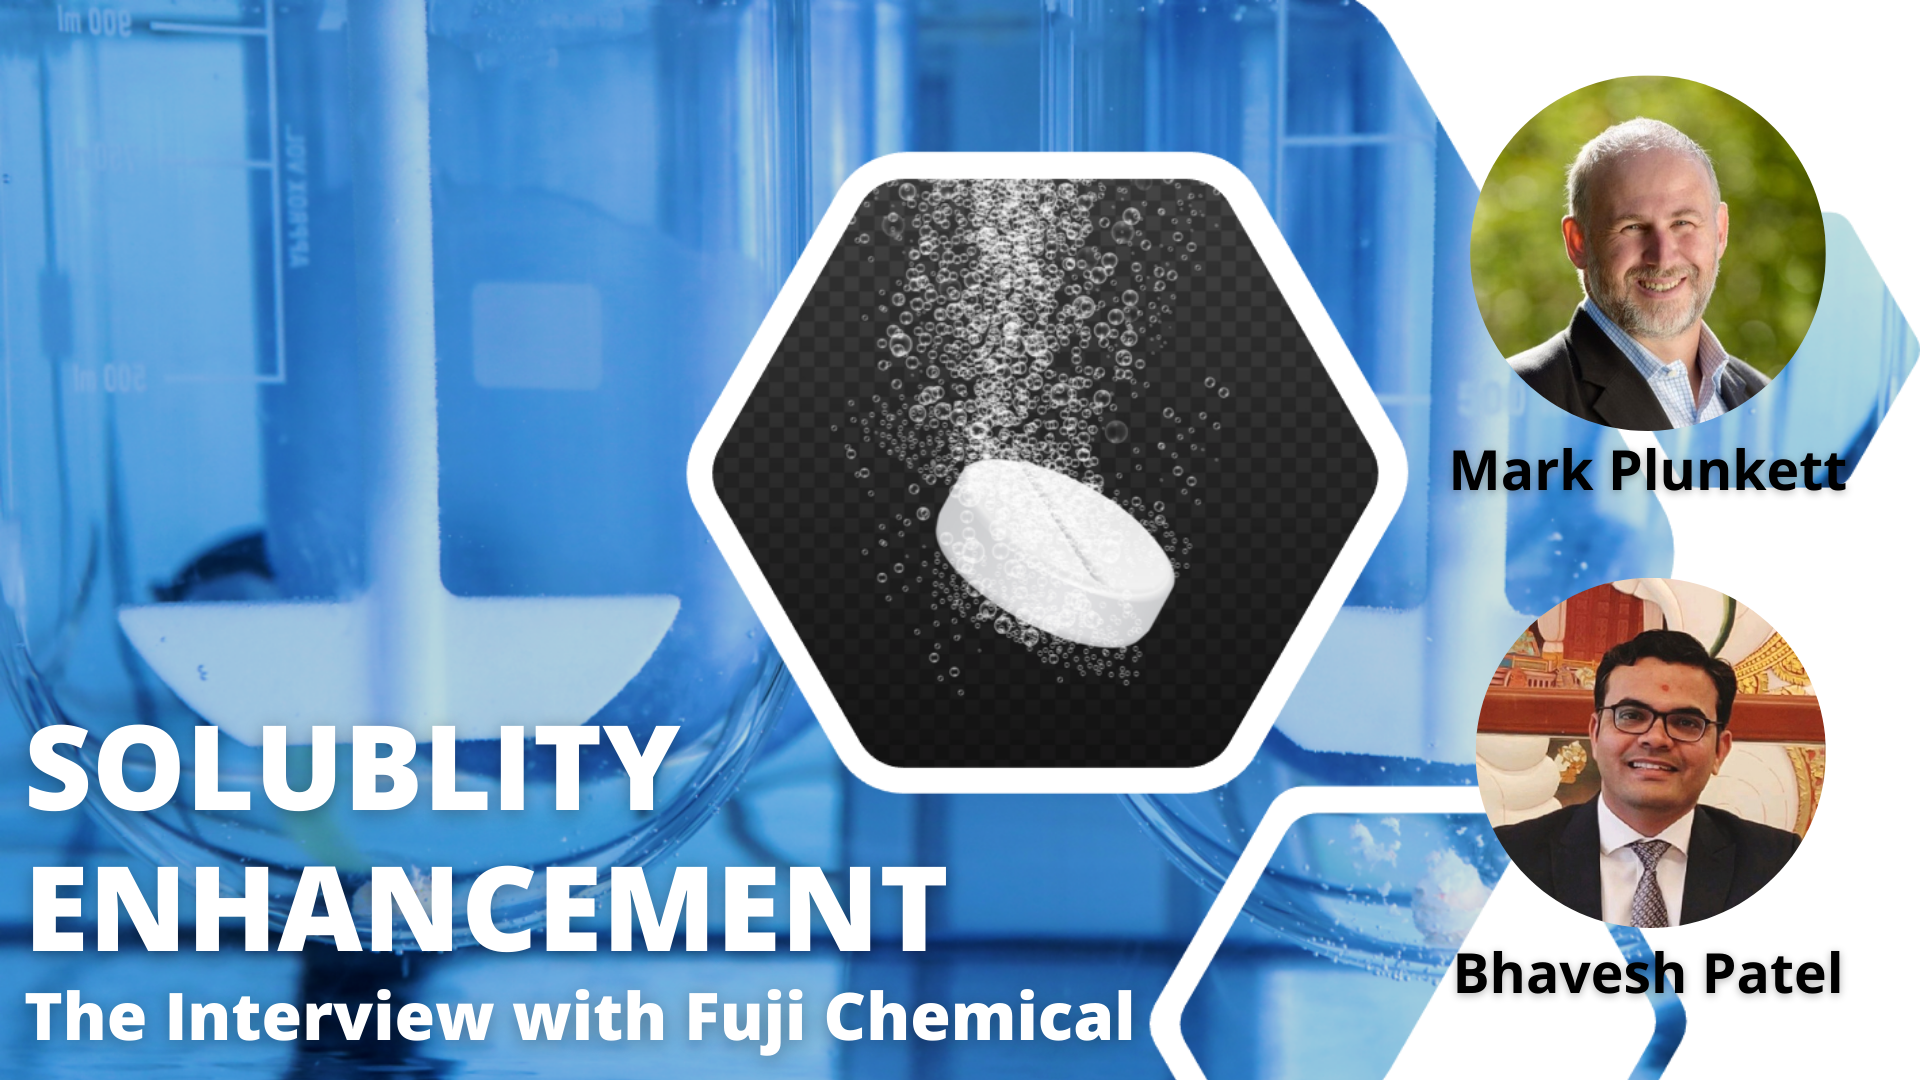 Solubility enhancement - The Interview with Fuji Chemical